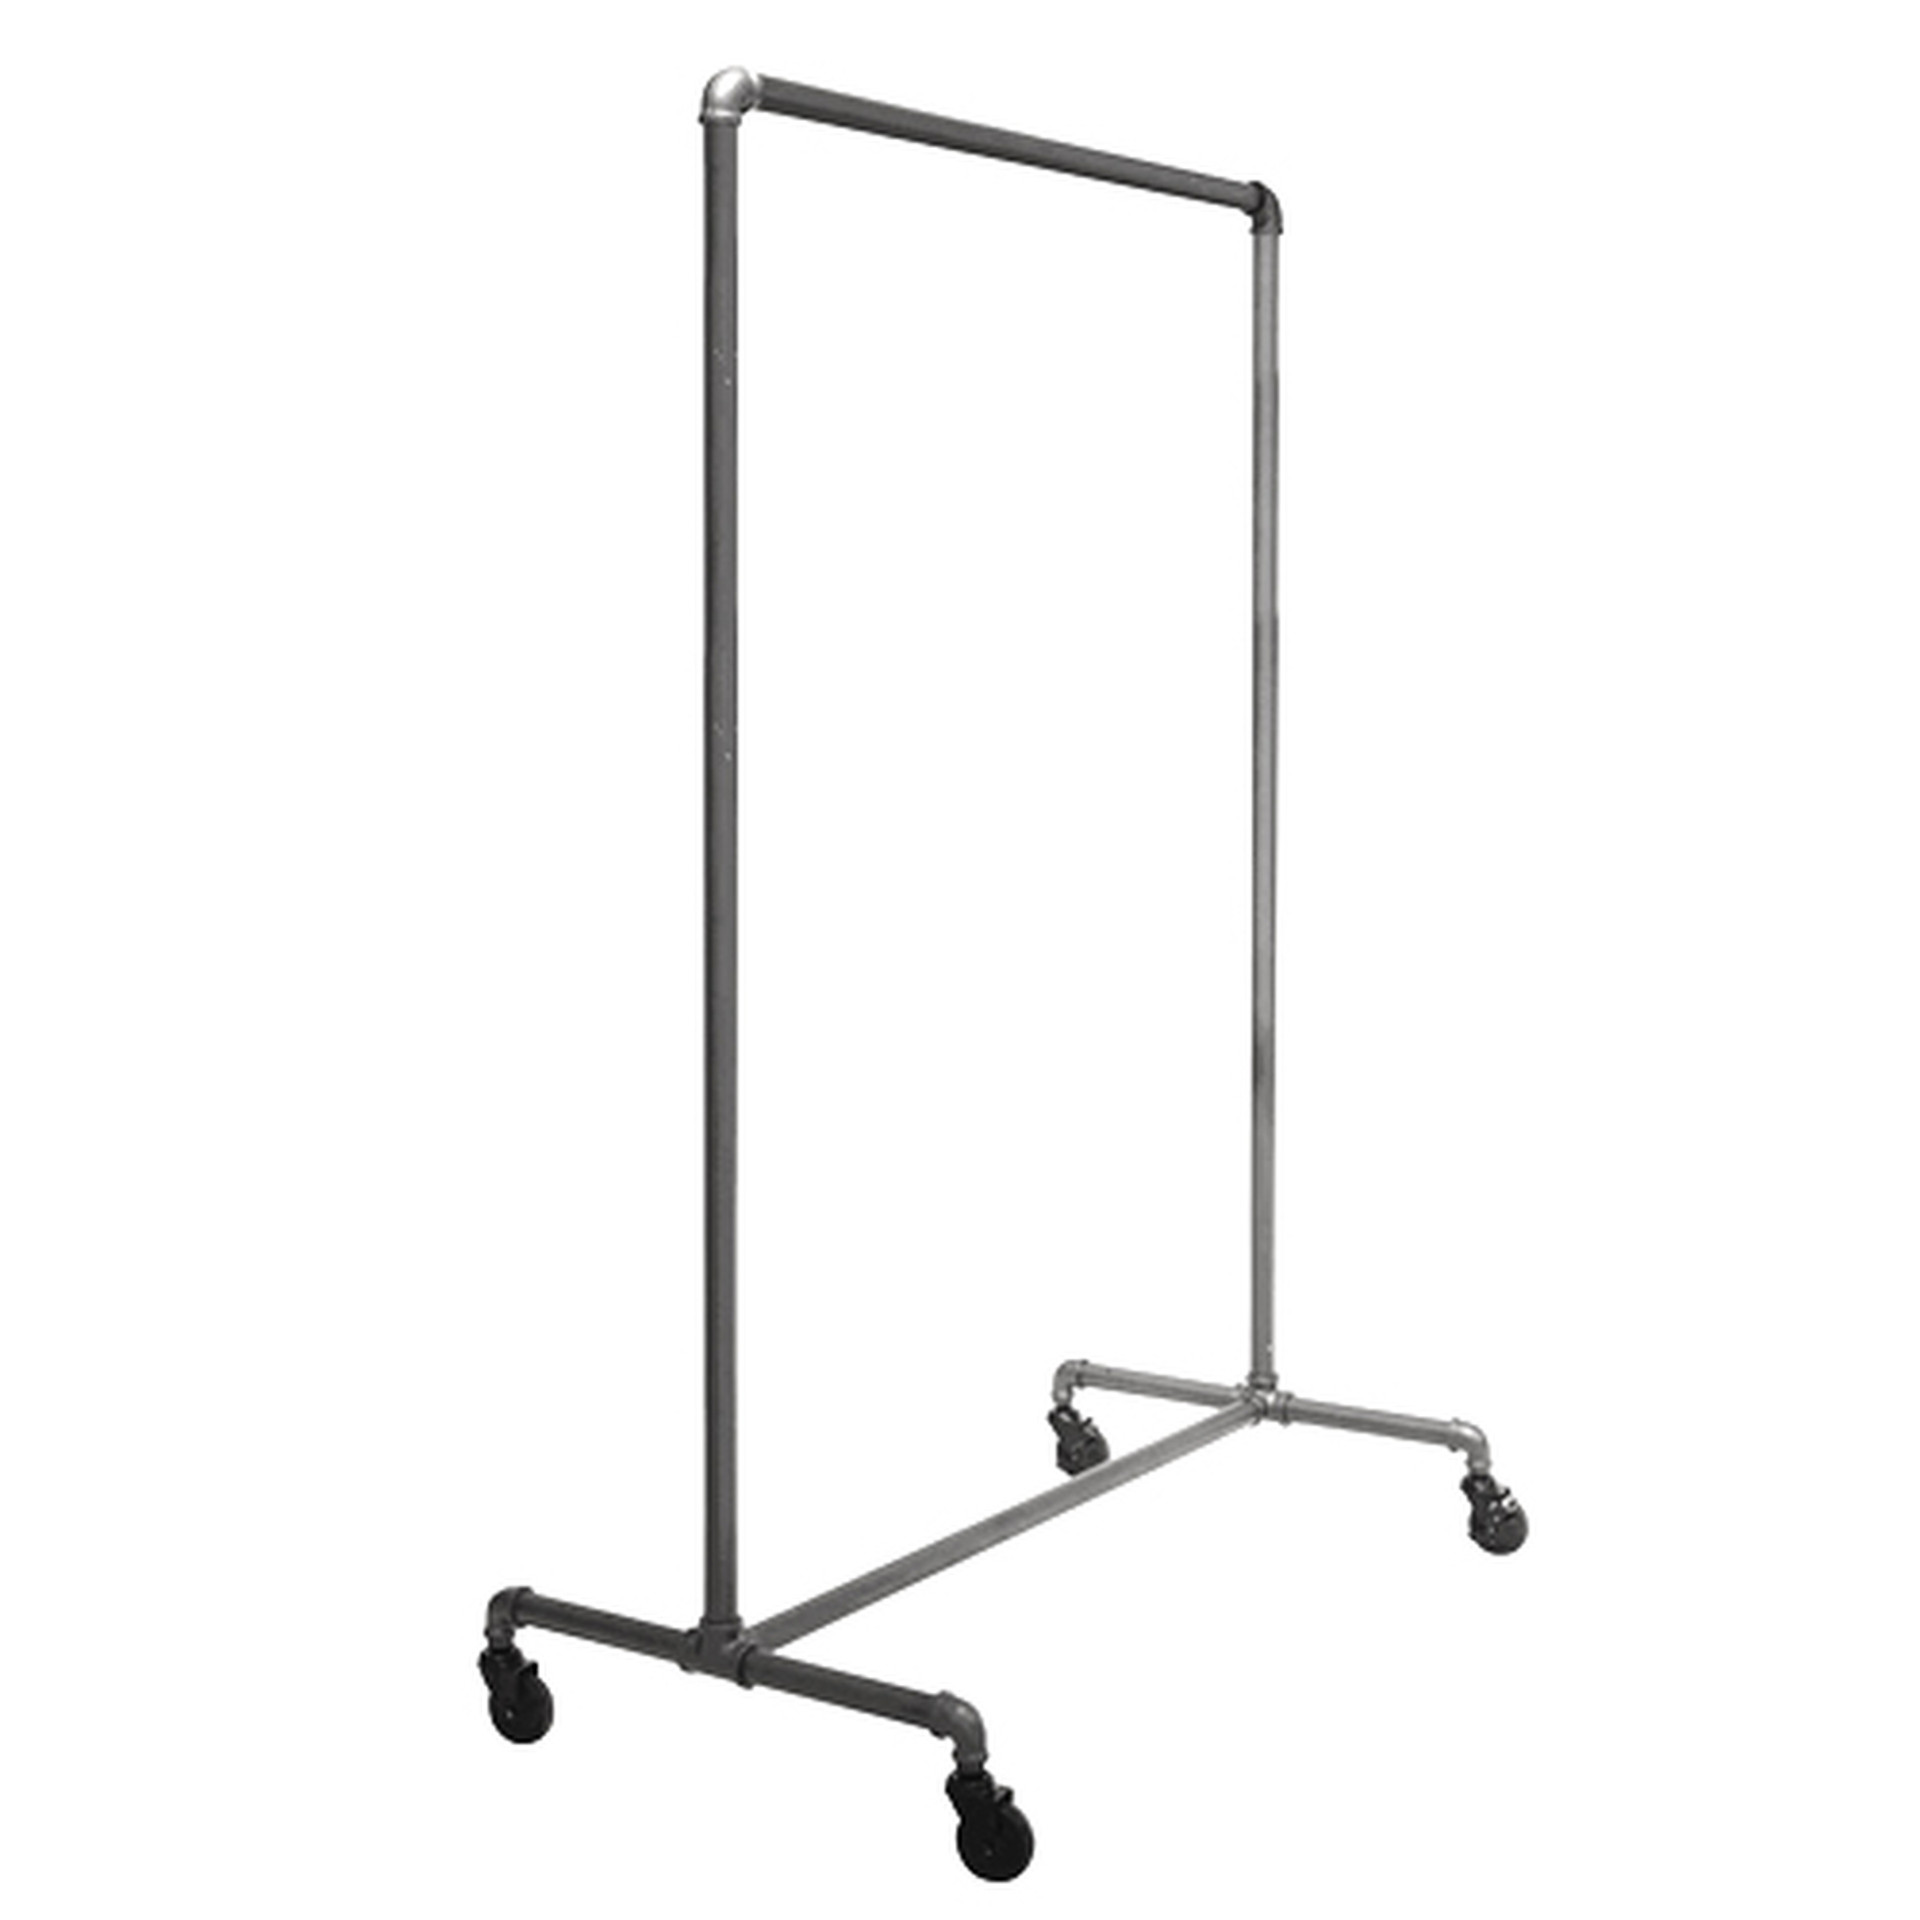 5.5 H x 7 W Pipe Clothing Rack Sign Holder | Product Display Solutions